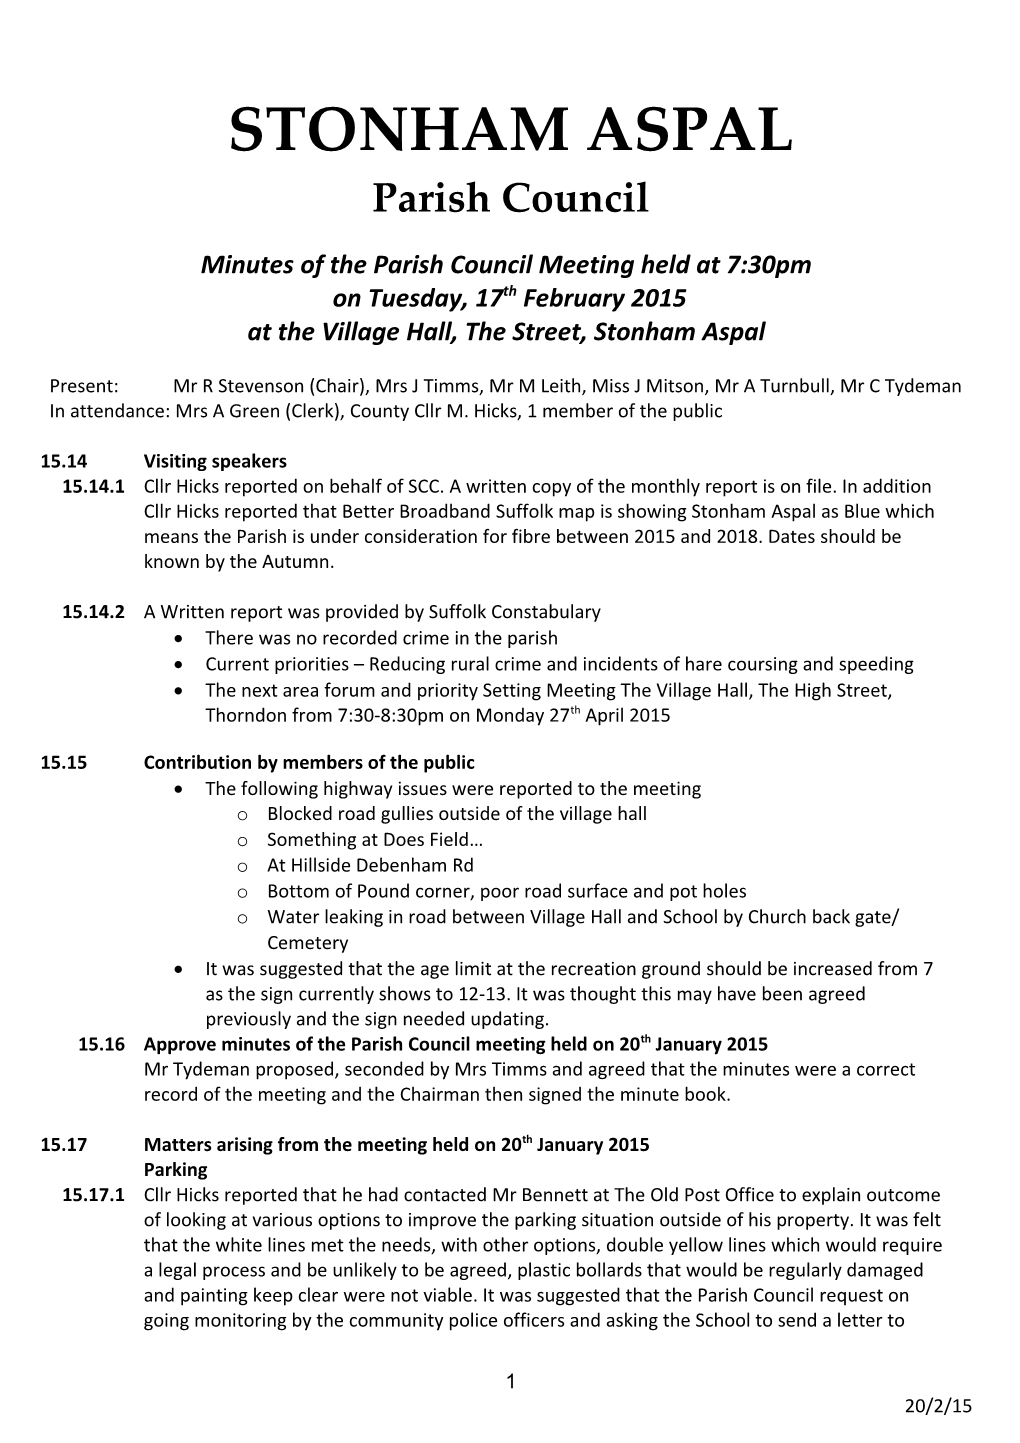 Minutes of the Parish Council Meeting Held at 7:30Pm